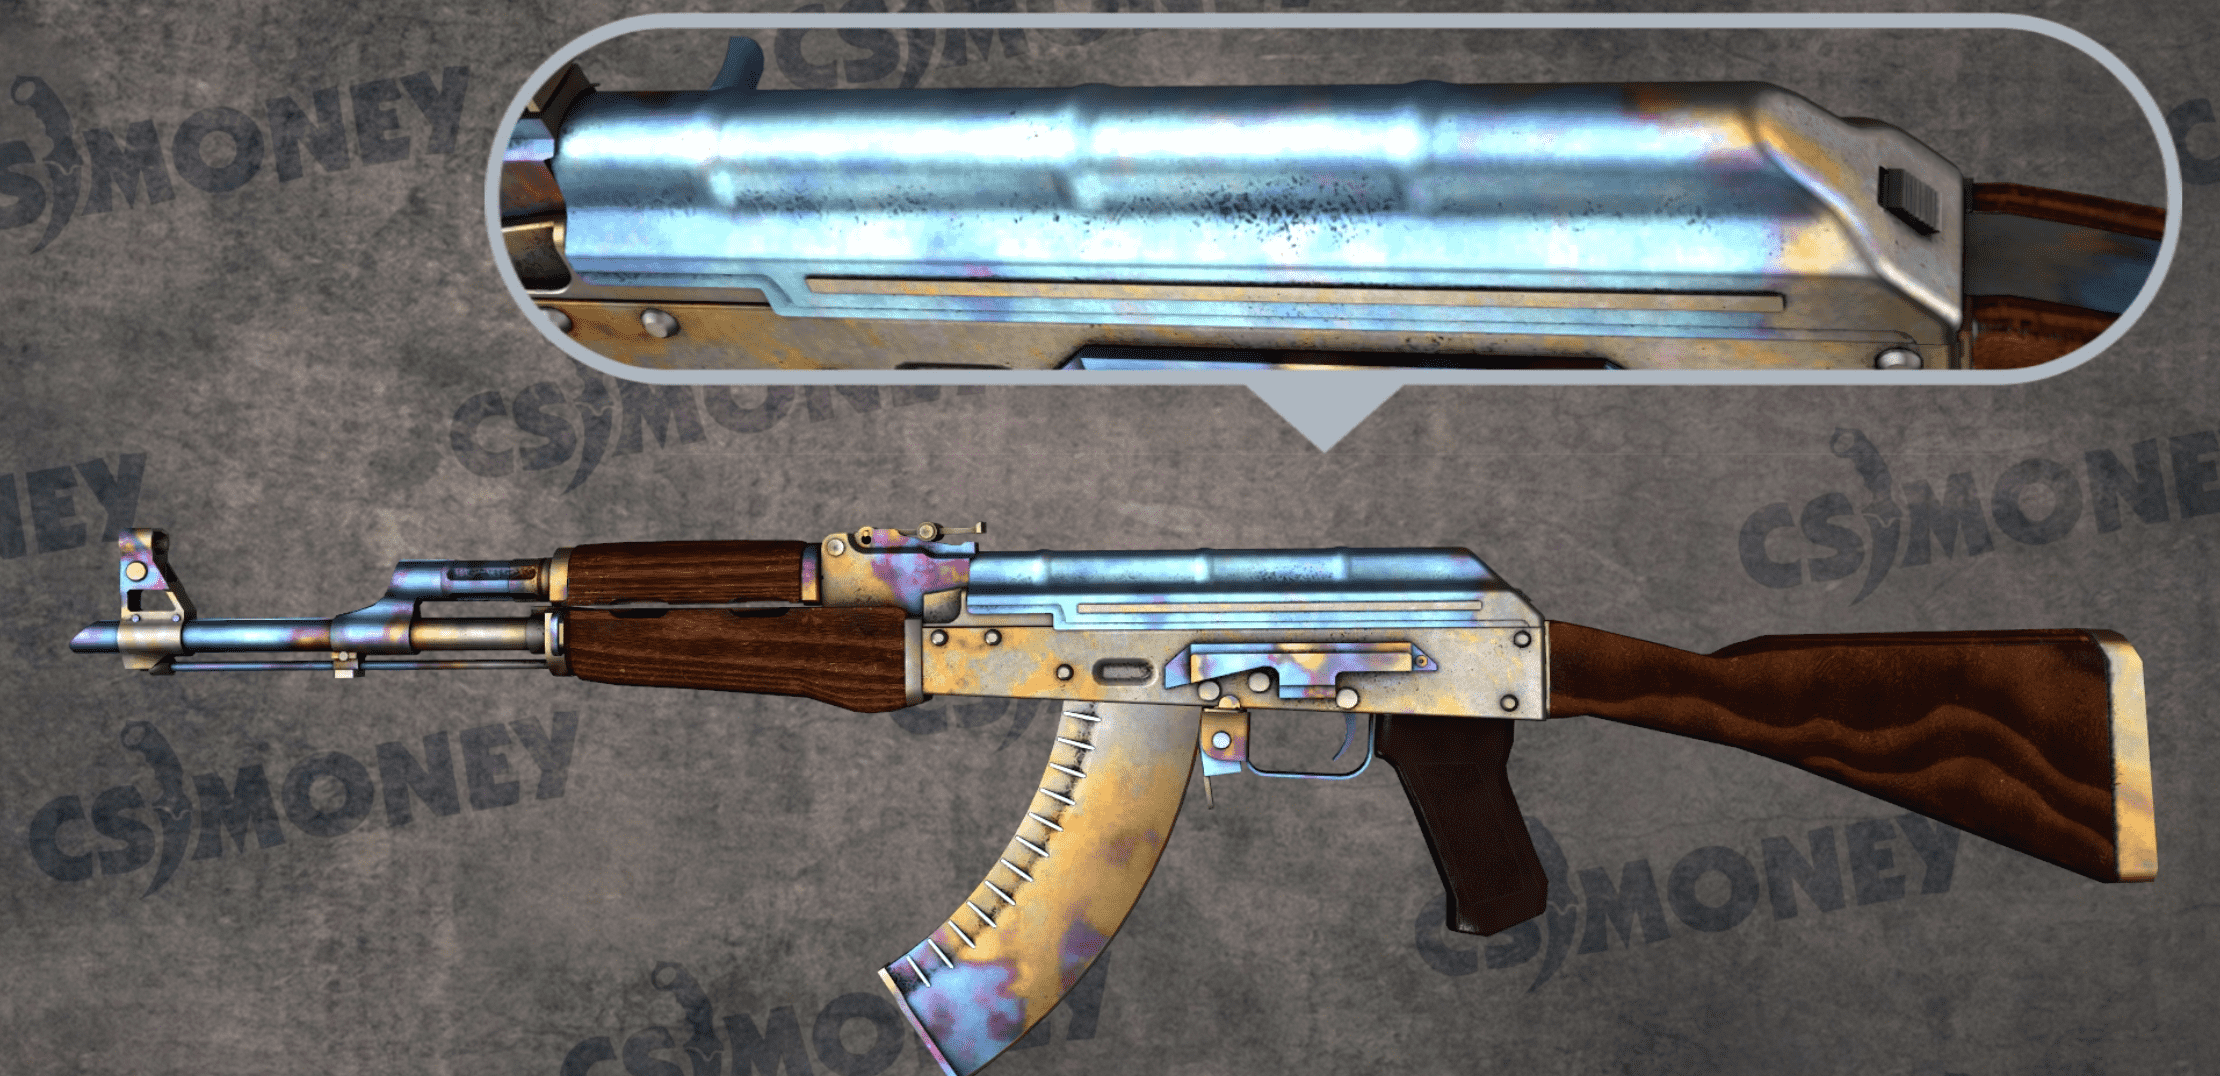 AK-47 Case Hardened Seed 592 has a beautiful blue top similar to pattern 15...